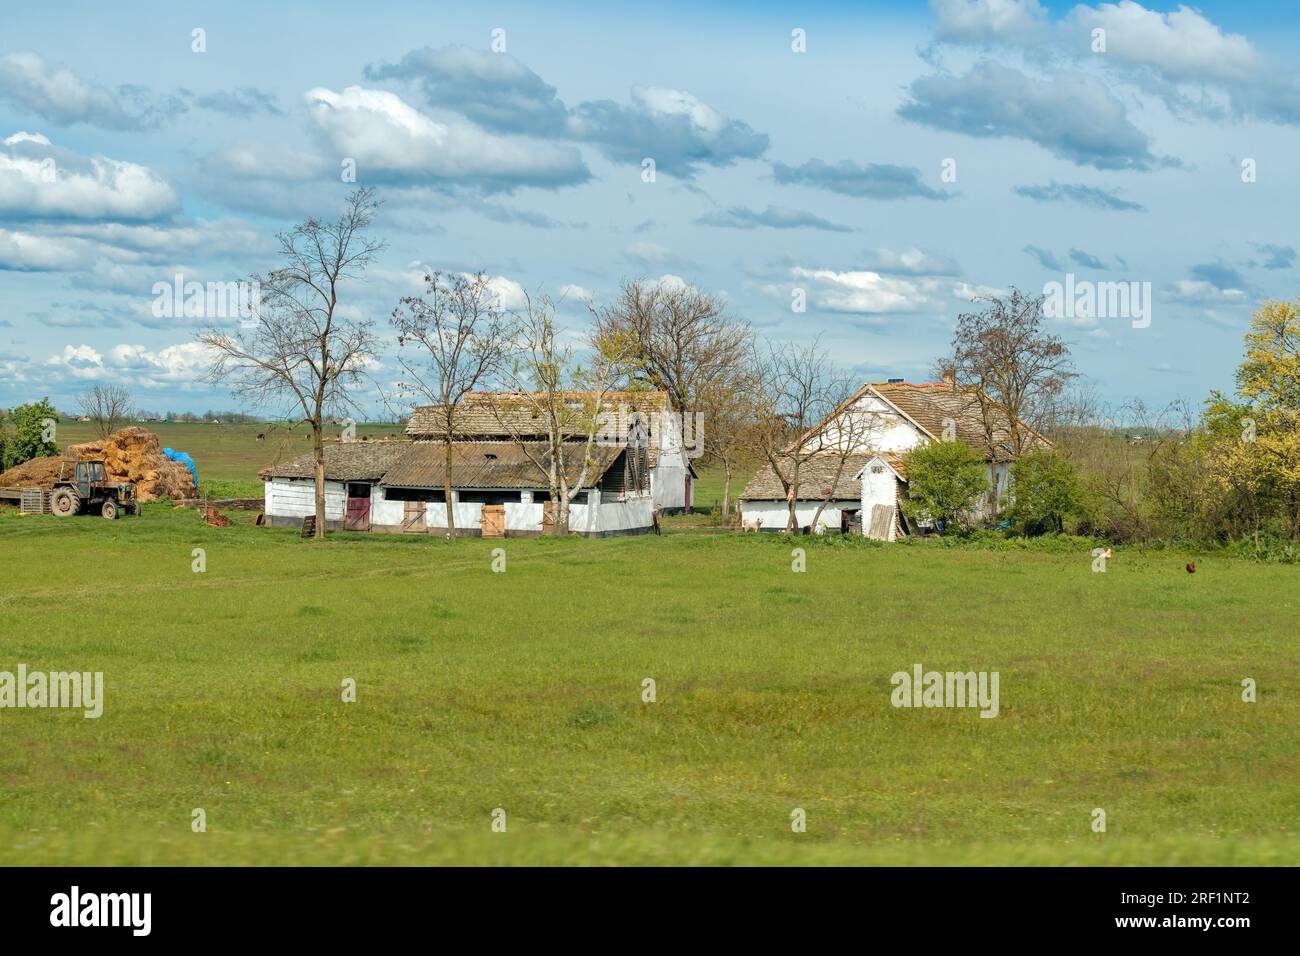 Typical old salas in Vojvodina, a traditional type of property in the Pannonian Plain region, with family house and agricultural objects, surrounded b Stock Photo